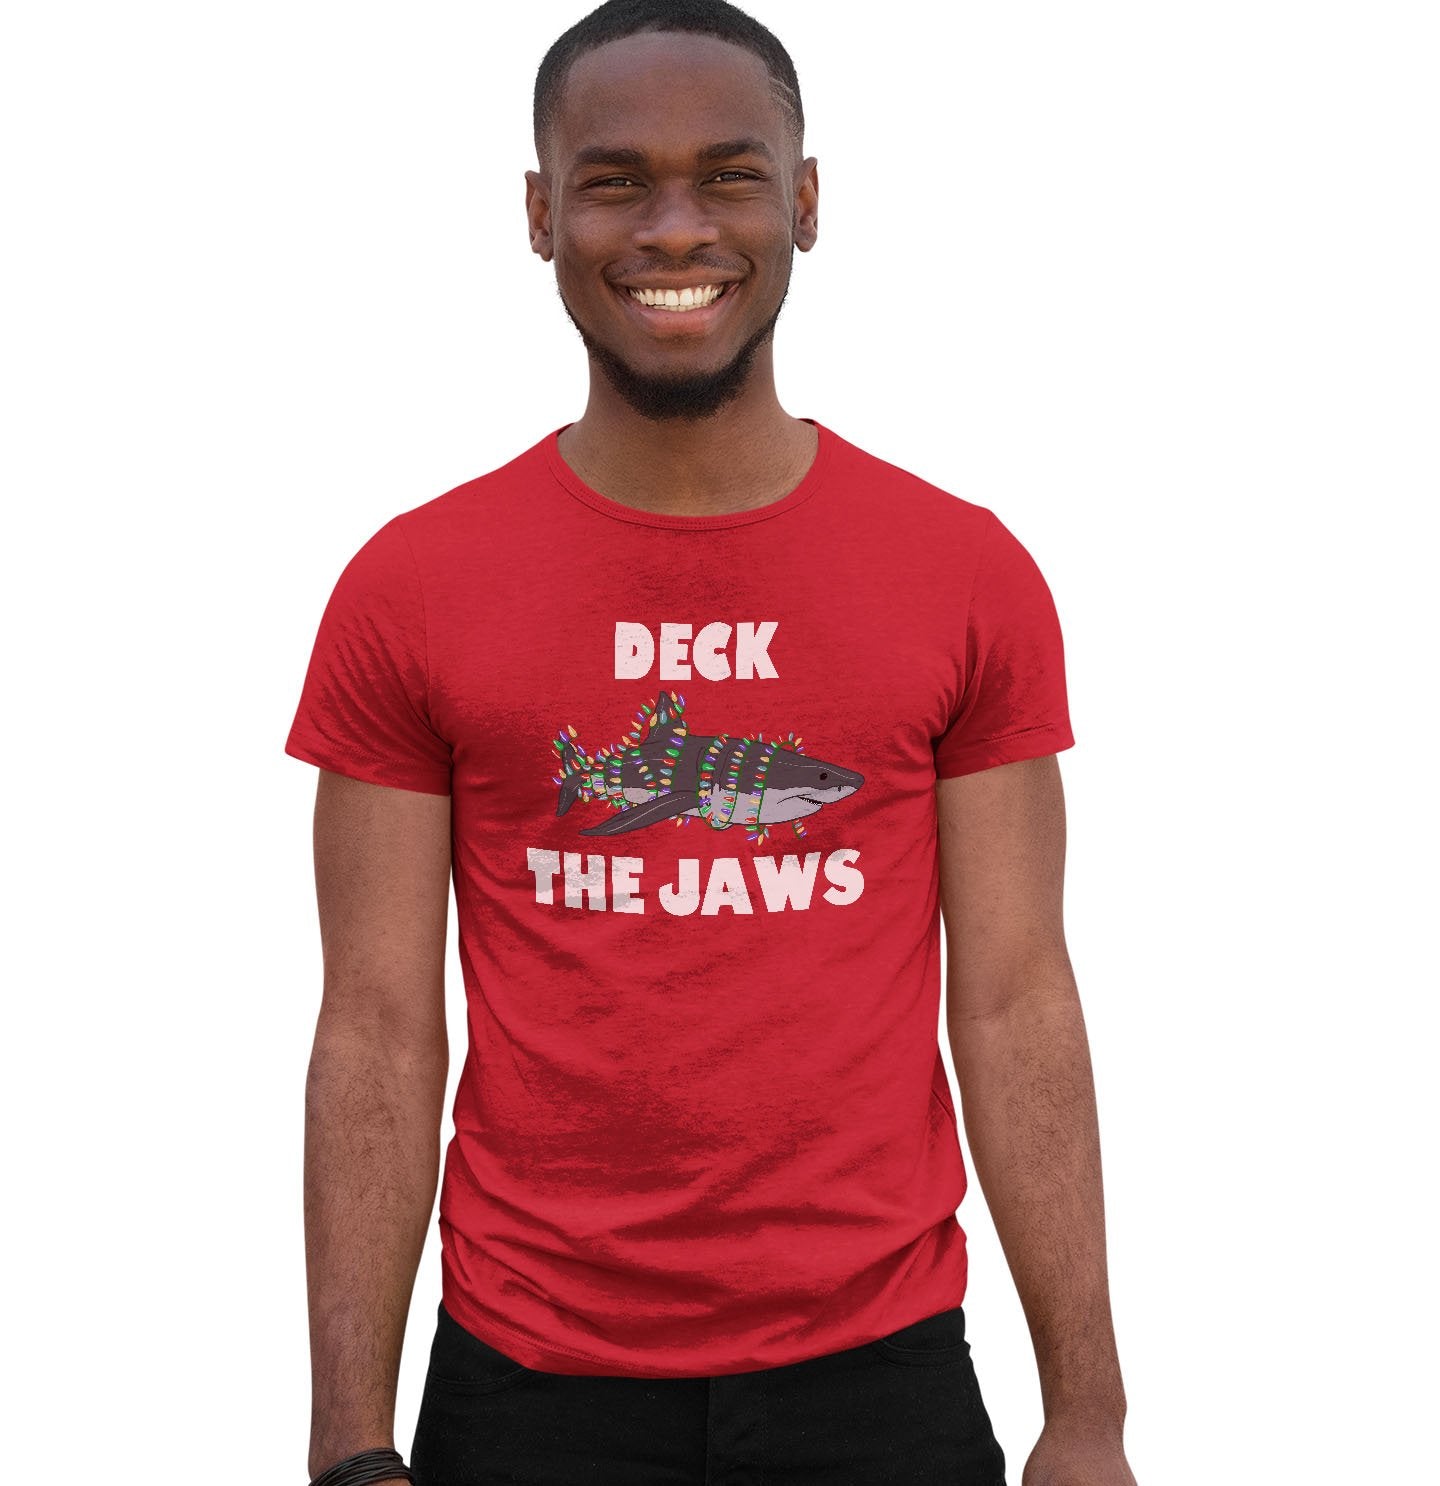 Deck the Jaws - Adult Unisex T-Shirt